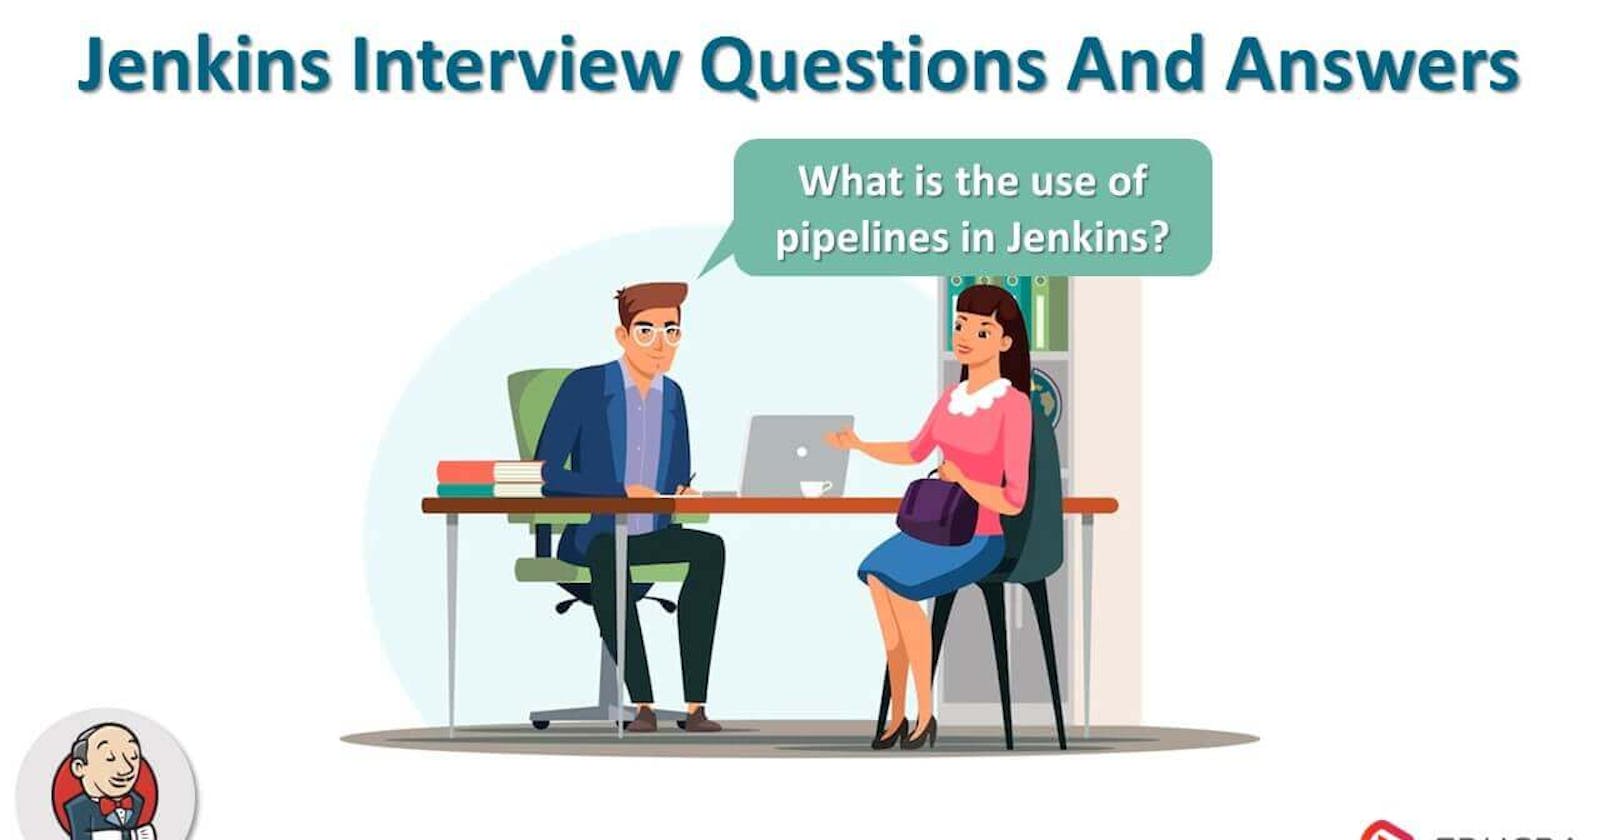 Day 29 Task: Jenkins Important interview Questions.